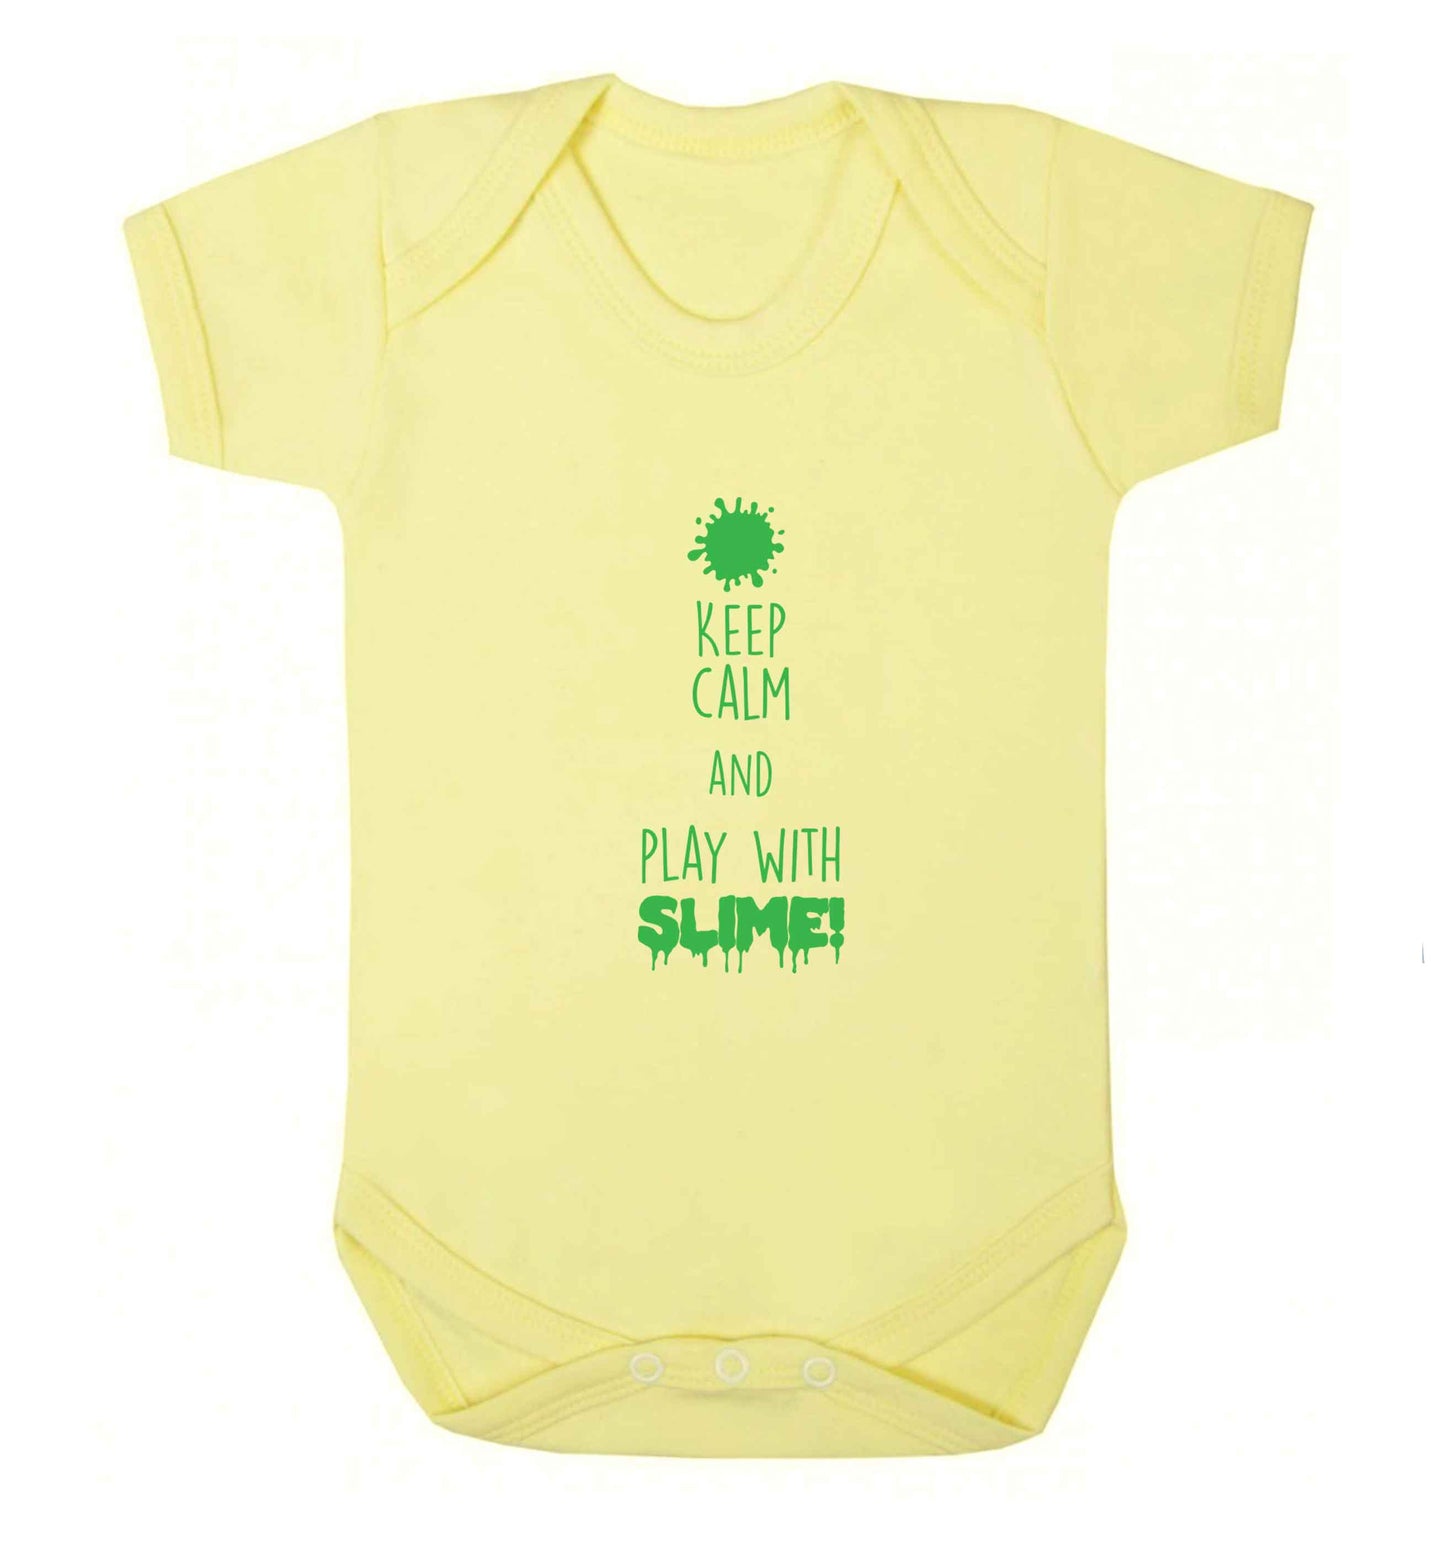 Neon green keep calm and play with slime!baby vest pale yellow 18-24 months